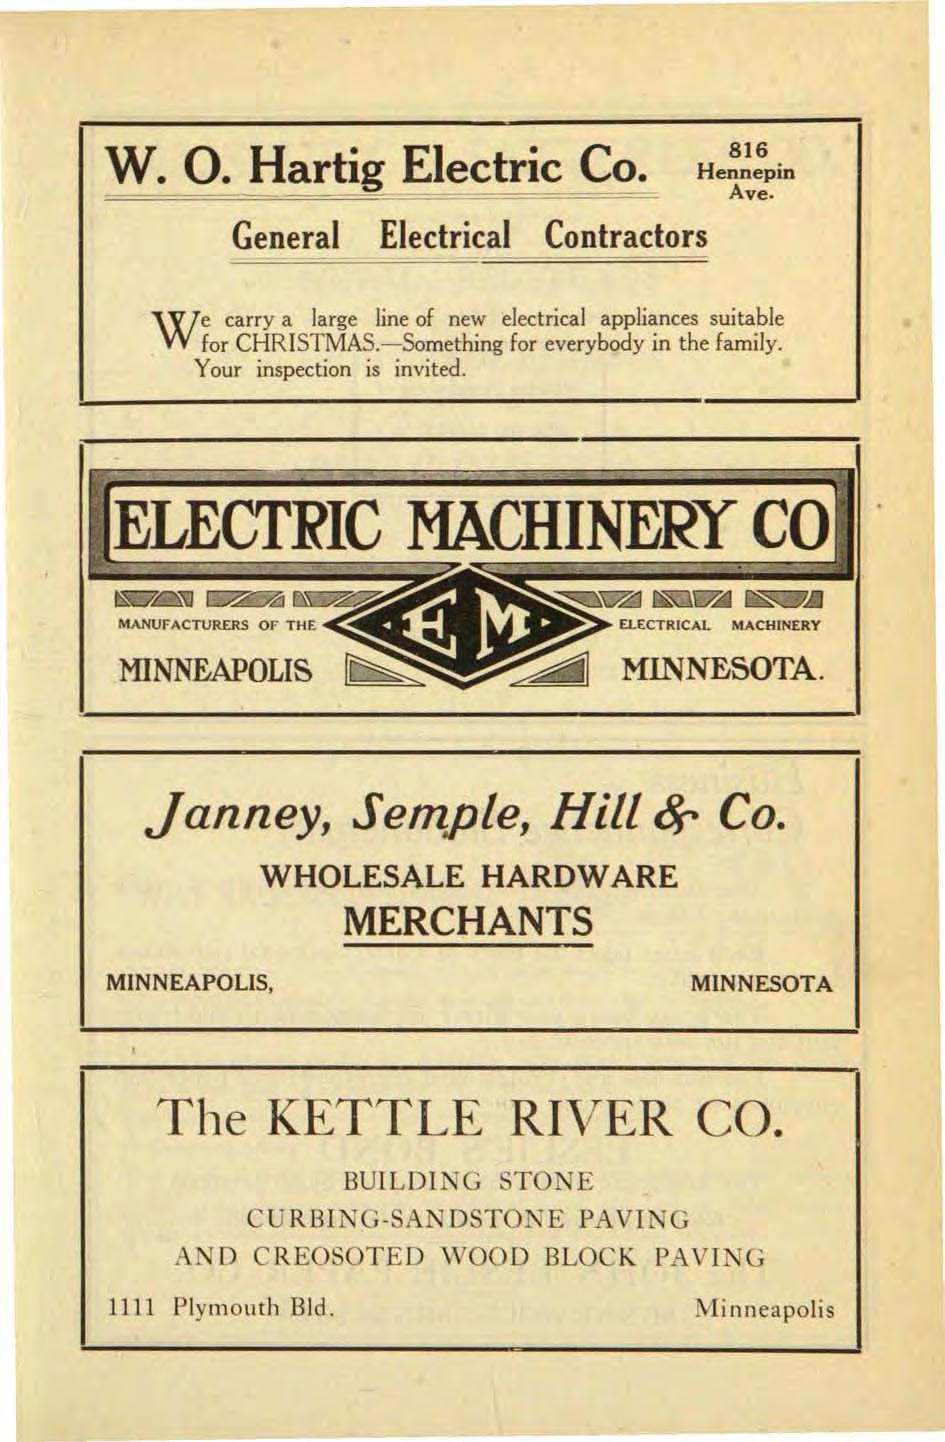 w. O. Hartig Electric Co. General Electrical Contractors 816 Hennepin Ave. e carry a large line of new electrical appliances suitable Wfor CHRISTMAS.-Something for everybody in the family.